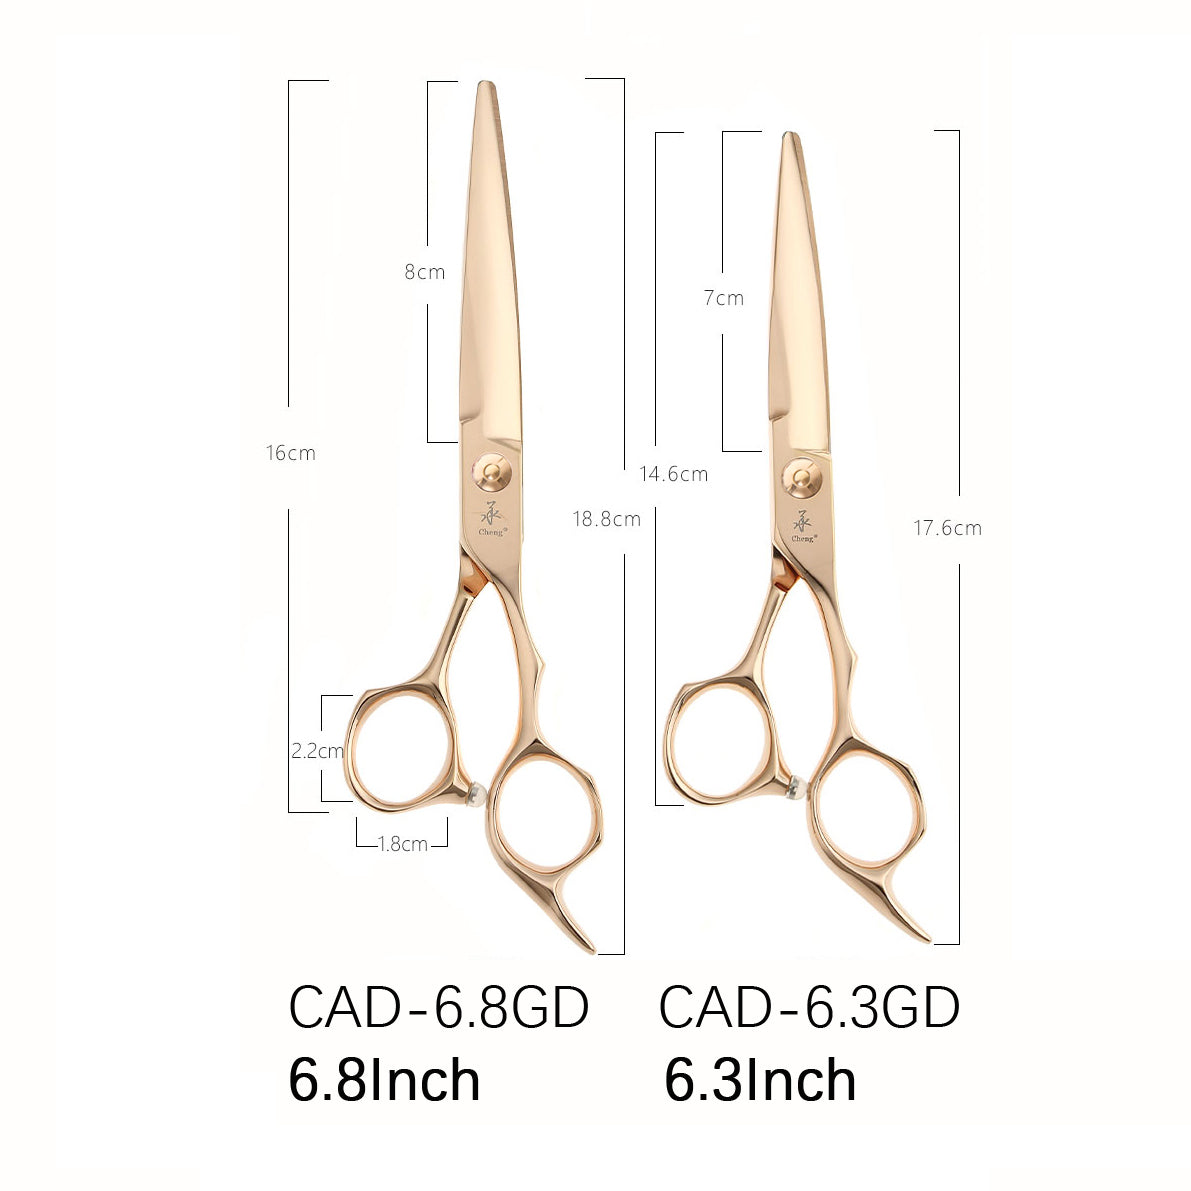 NEW CAD-6.3GD 6.3Inch/ 6.8Inch Hair Cutting Scissors Rose Gold Color